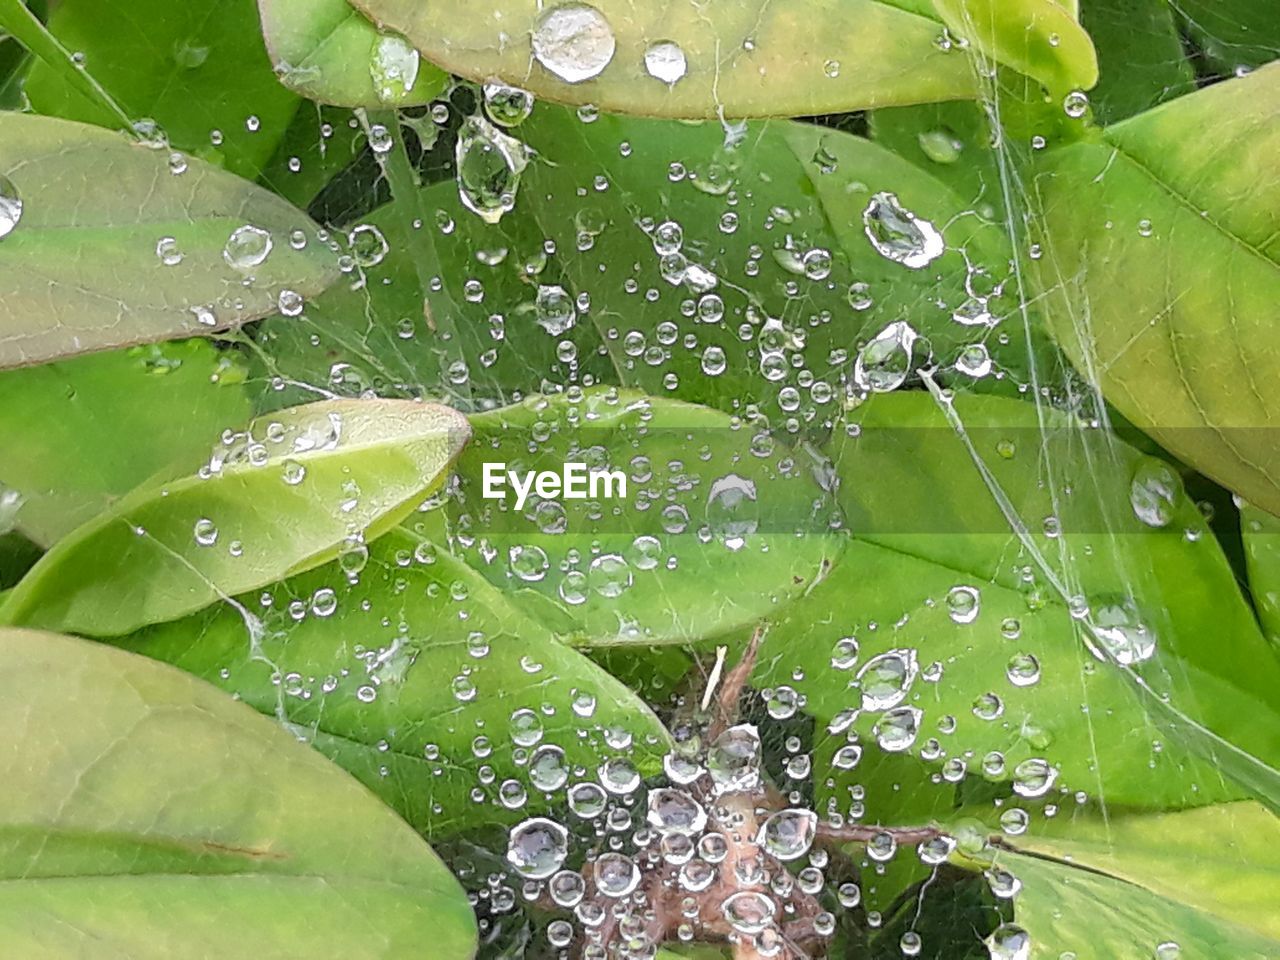 WATER DROPS ON LEAVES